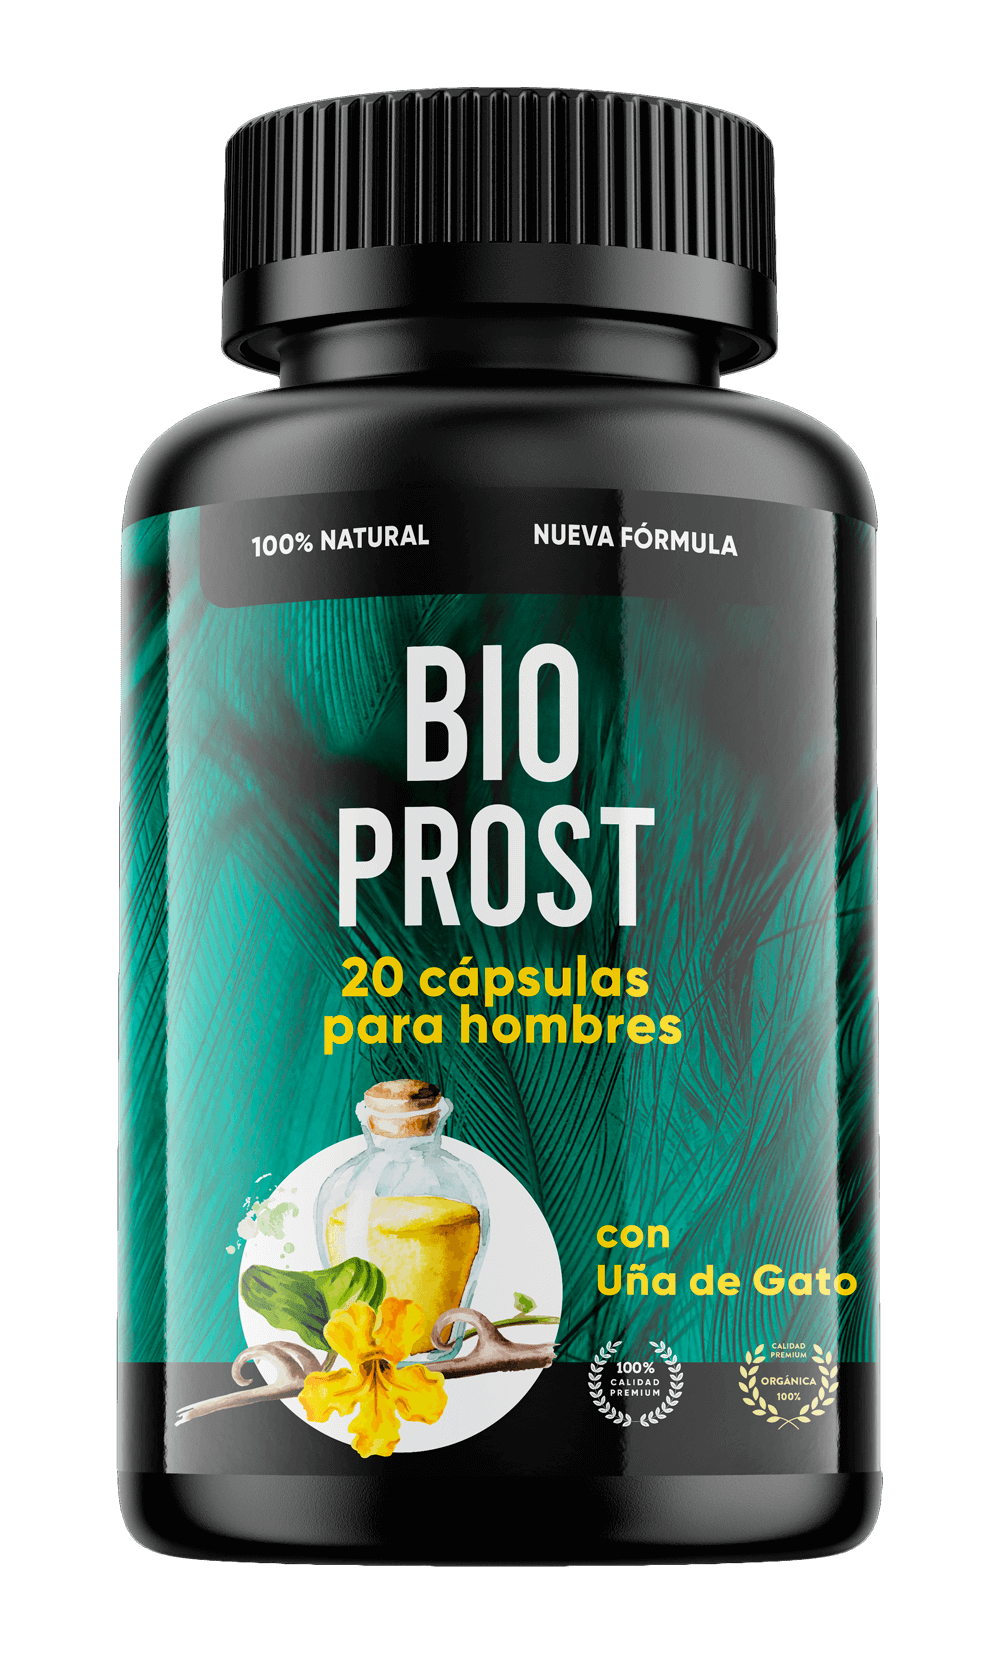 Bioprost Opiniones reales